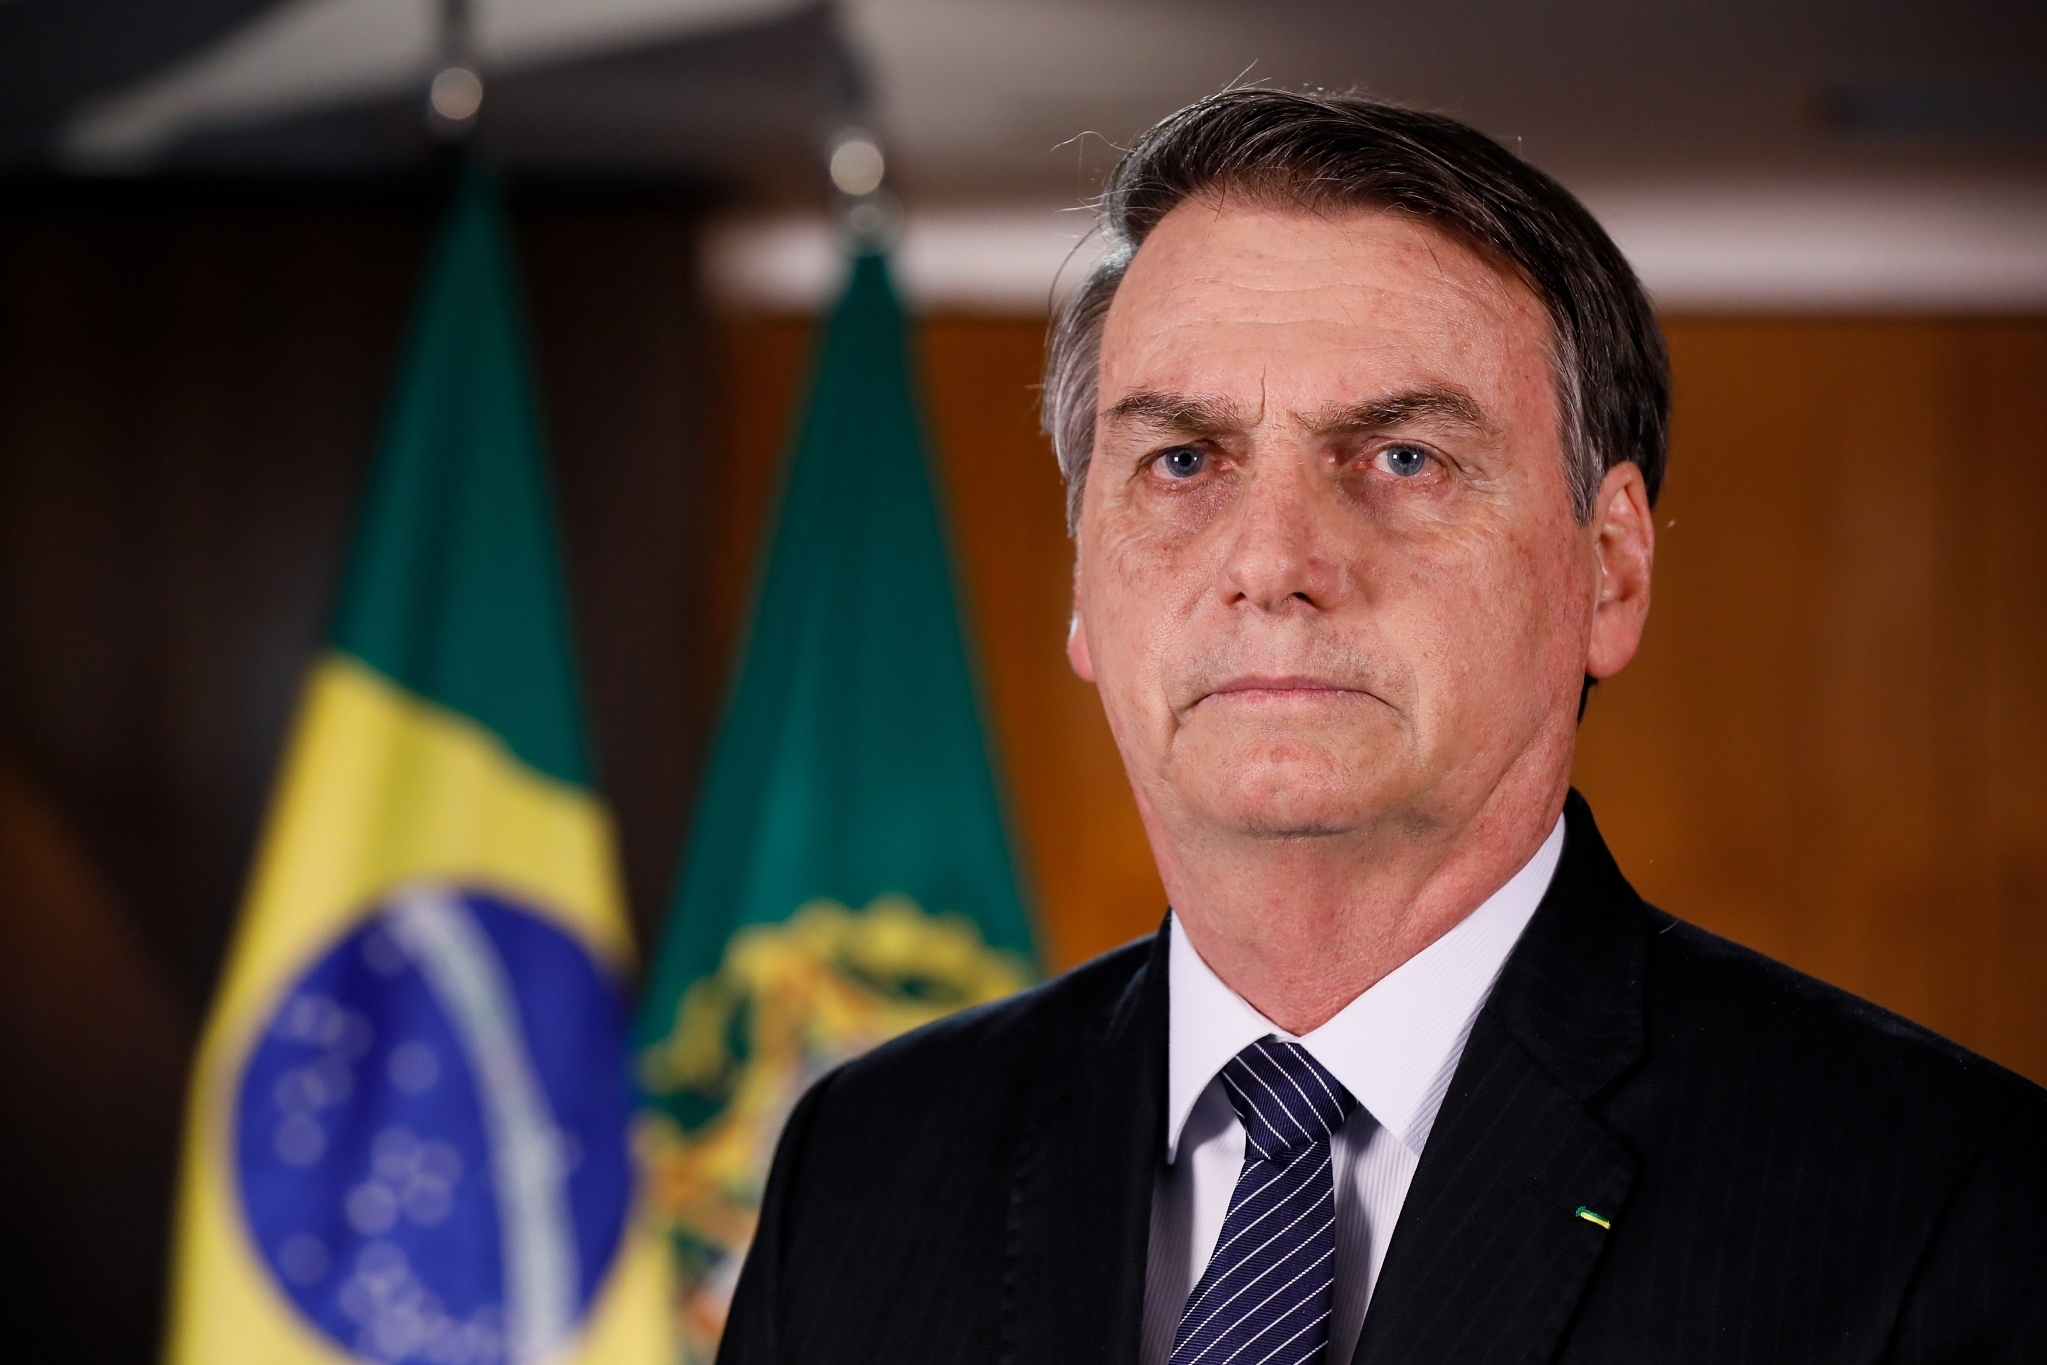 Brazil's President welcomes World Cup